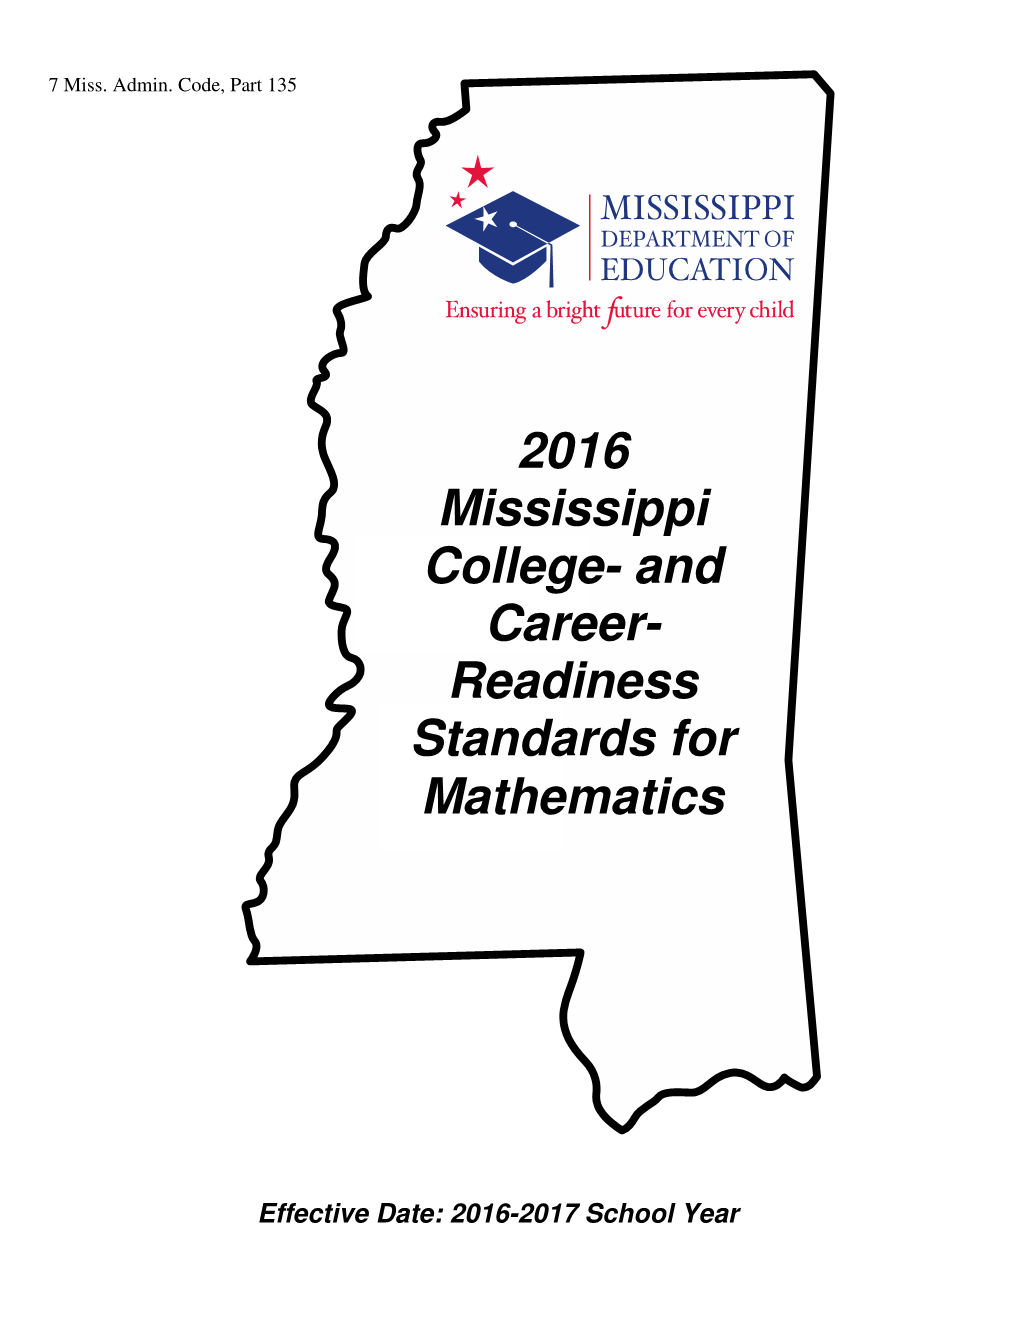 2016 Mississippi College- and Career-Readiness Standards for Mathematics